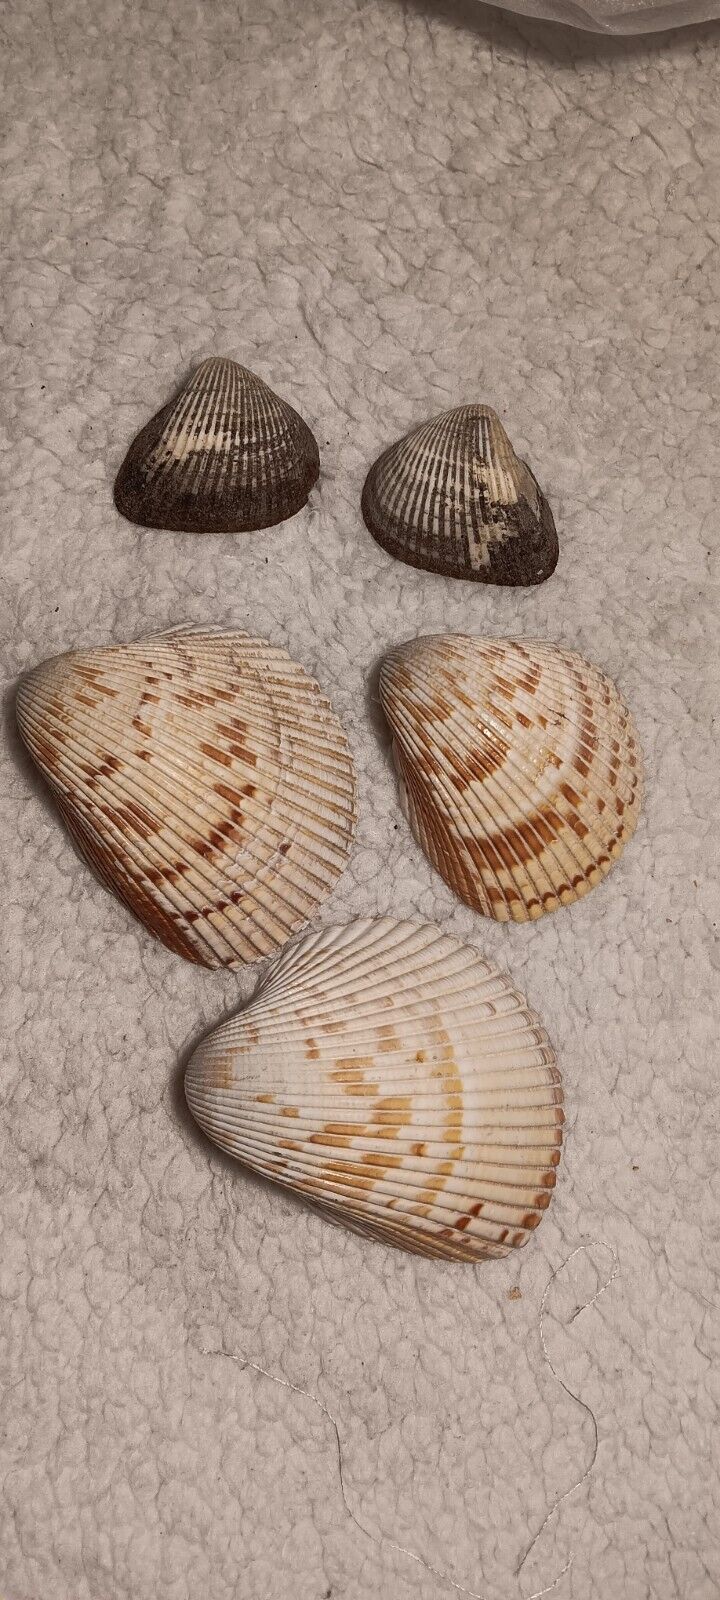 Lot Of 5 Shells Cockles